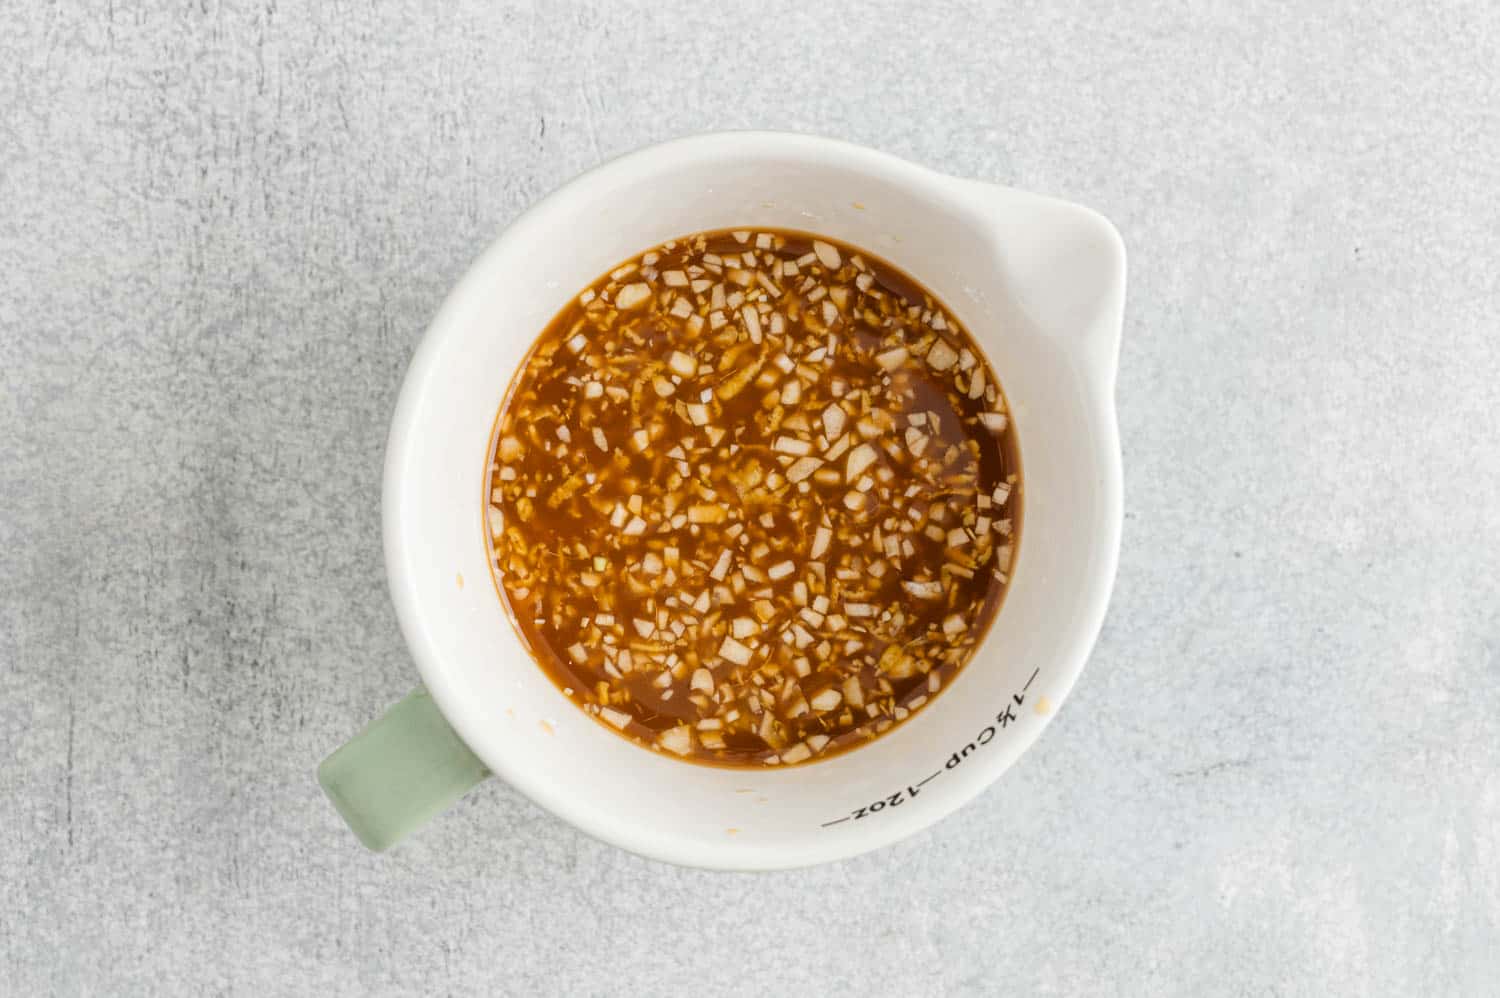 Teriyaki sauce ingredients mixed together in white measuring cup.